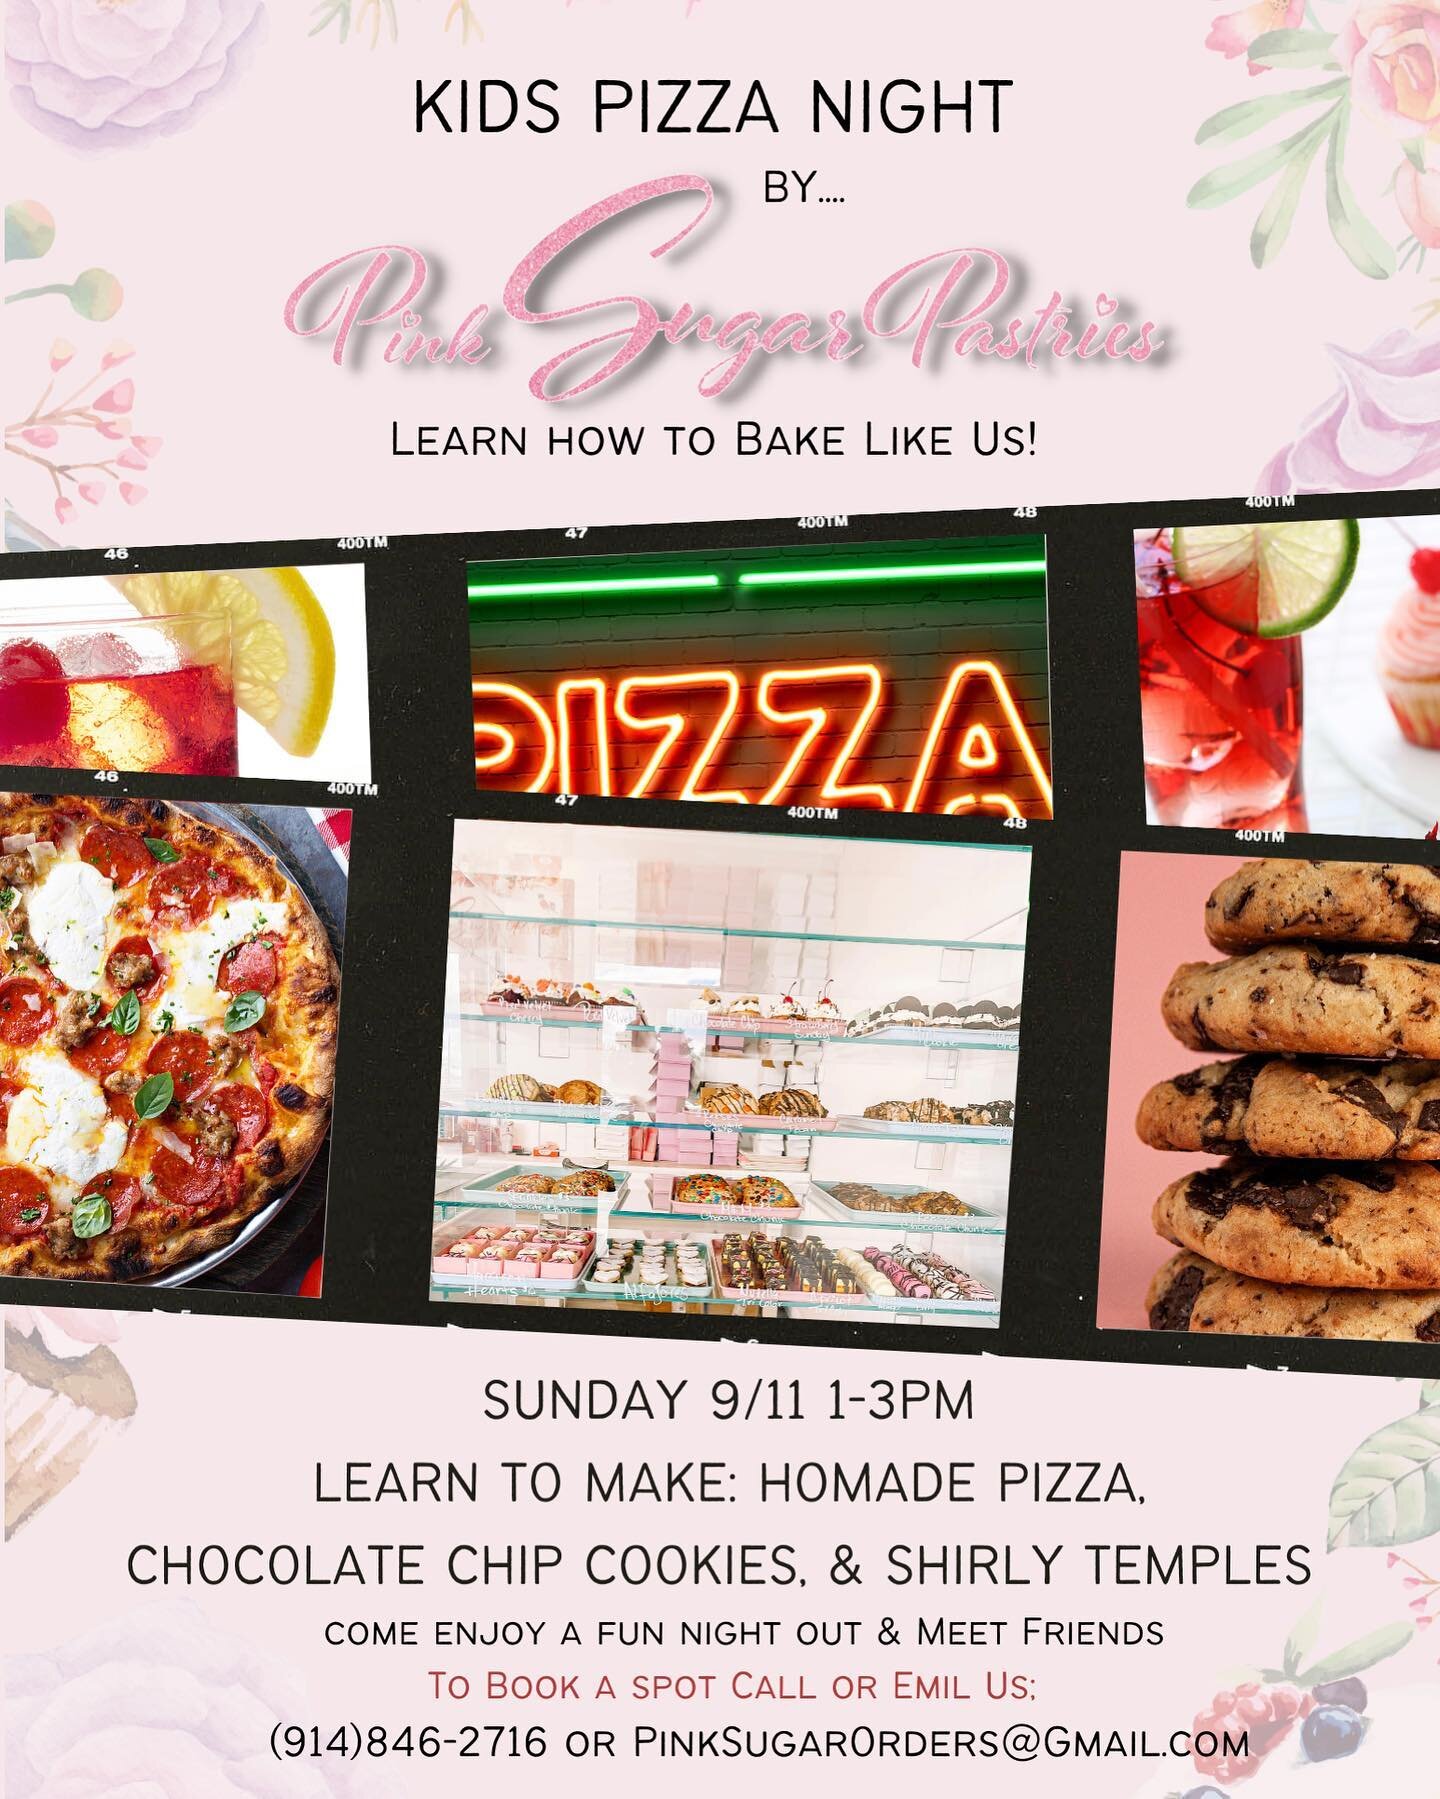 Sweet friends, join us for a fun, Kids Pizza Night!! WHEN? Sunday, 9/11 @ 1-3PM for ages 6-9 🎉 Call during store hours at 914.846.2716 ☎️ or email us at PinkSugarOrders@gmail.com

Admission is $45 / student &mdash; hope to see you there!! 💖